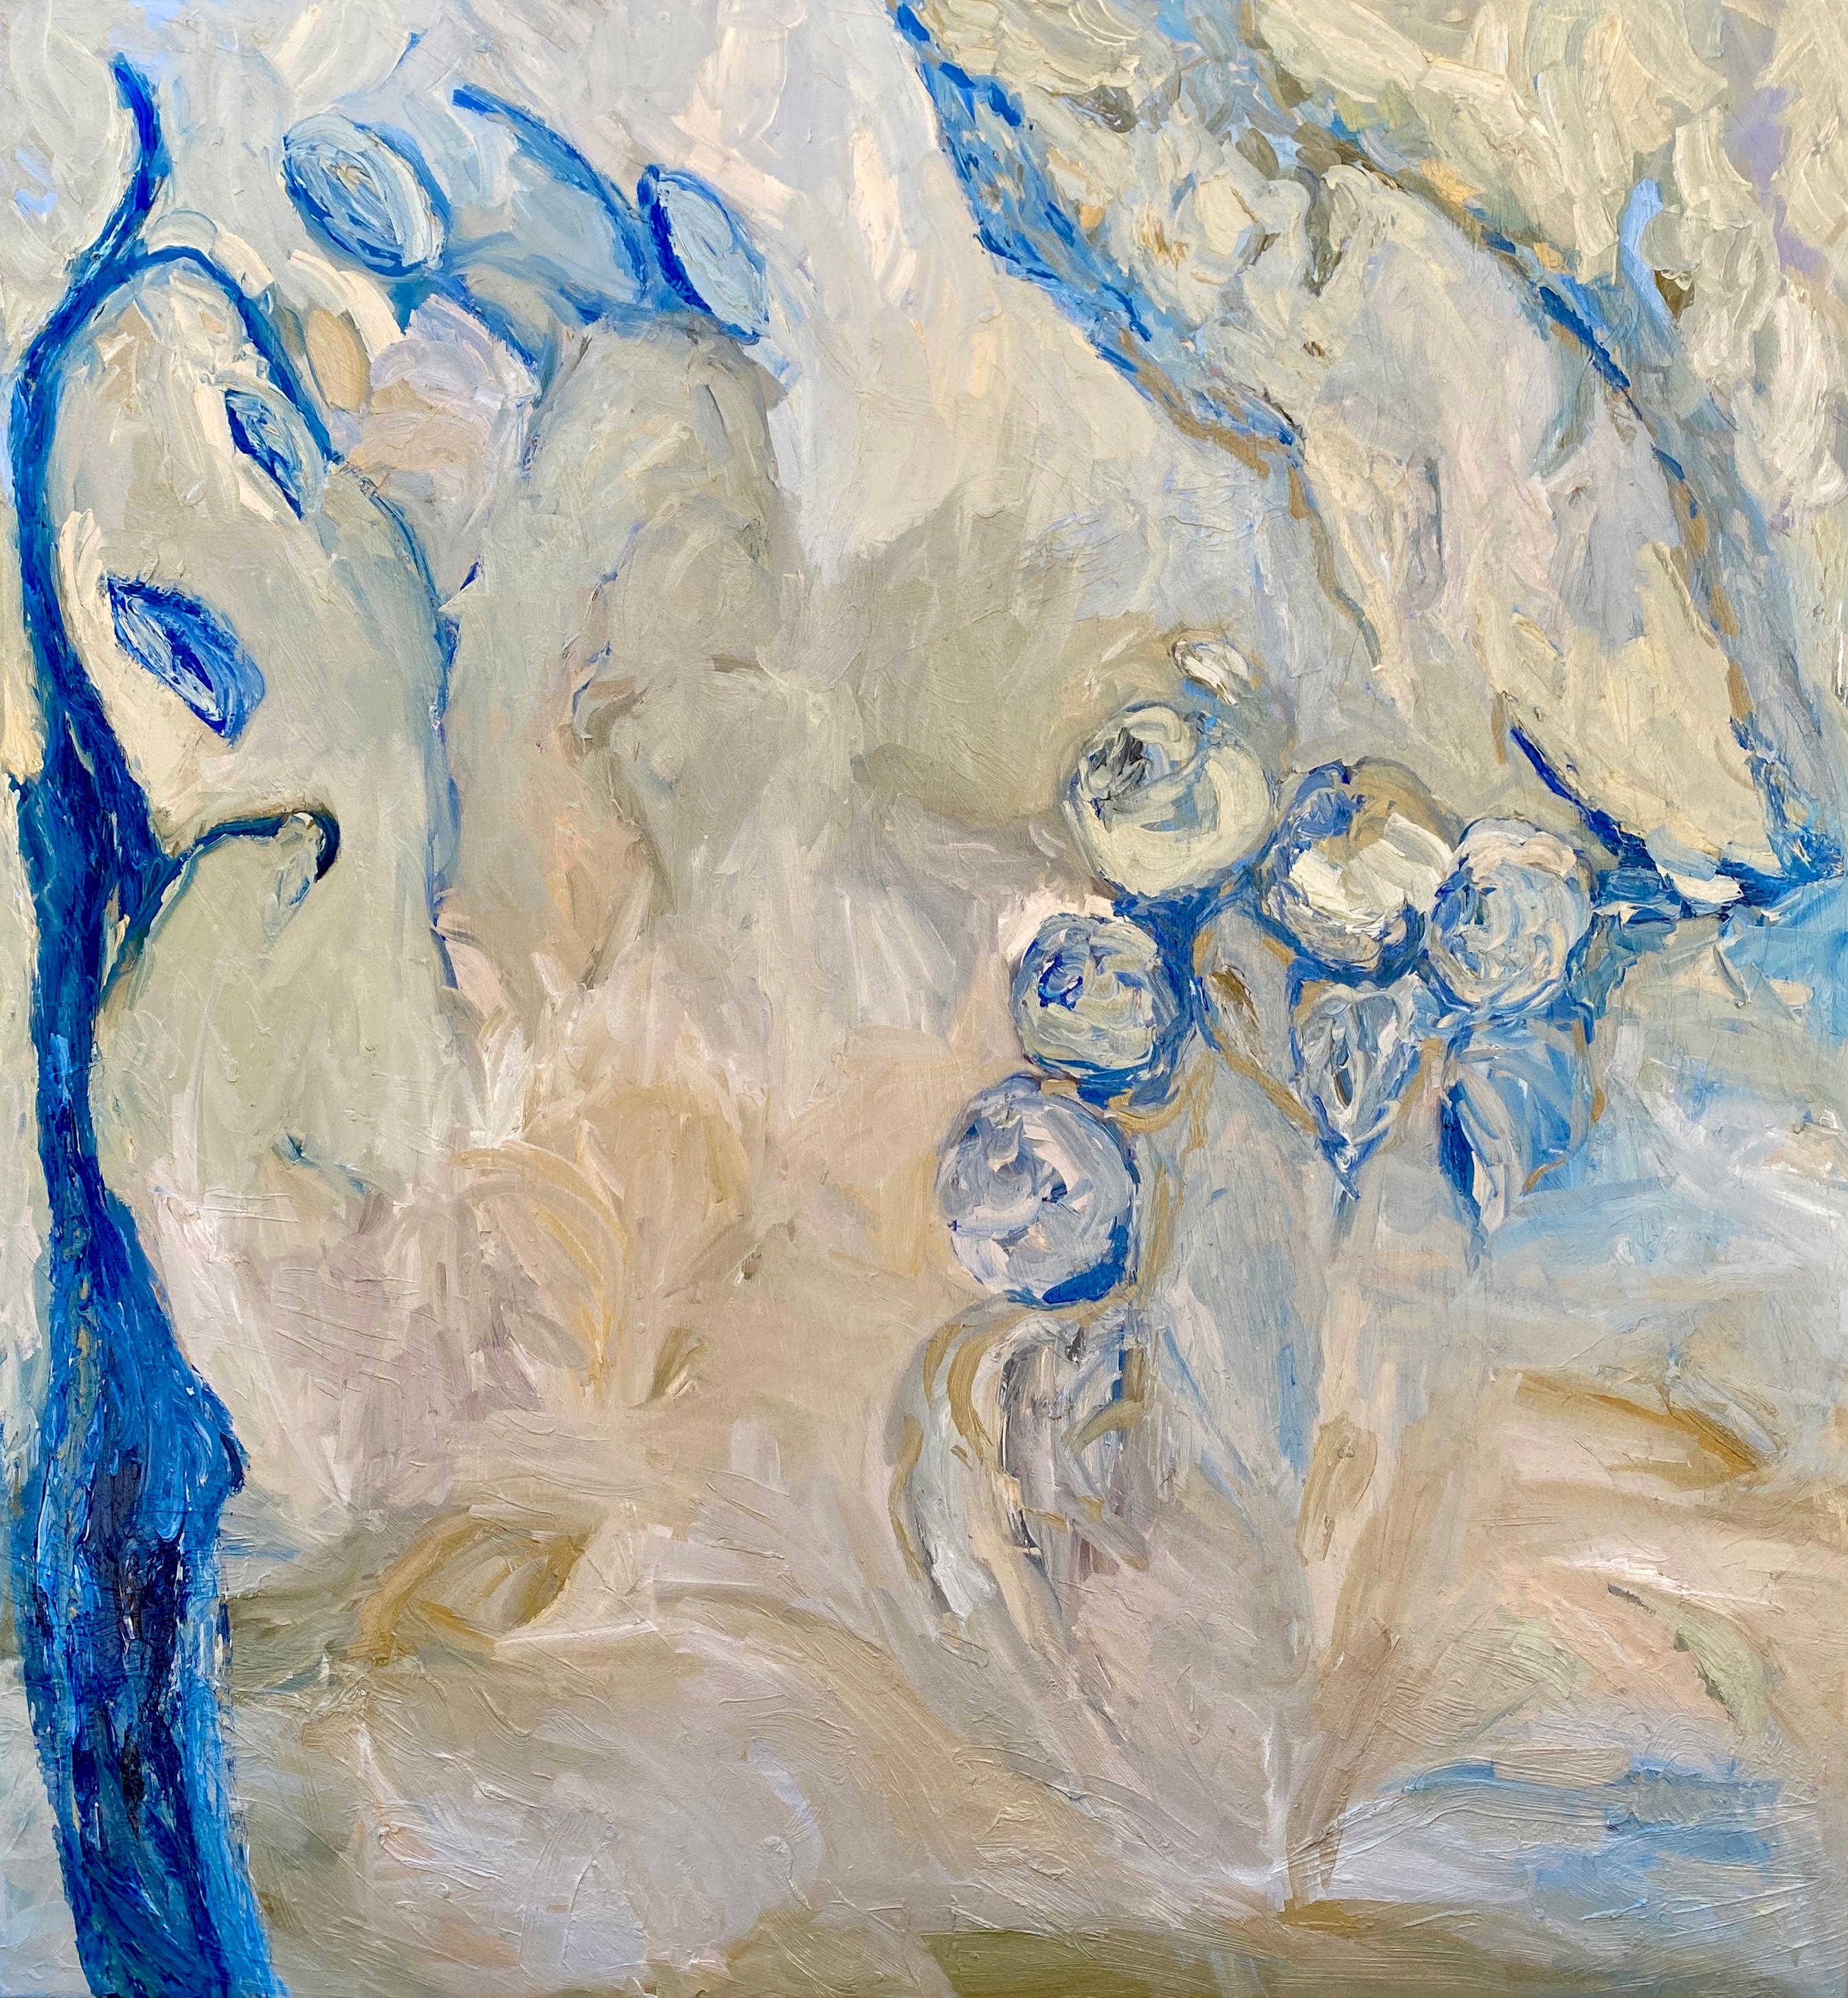 Blue Sanctuary. Large Contemporary Expressionist Oil Painting